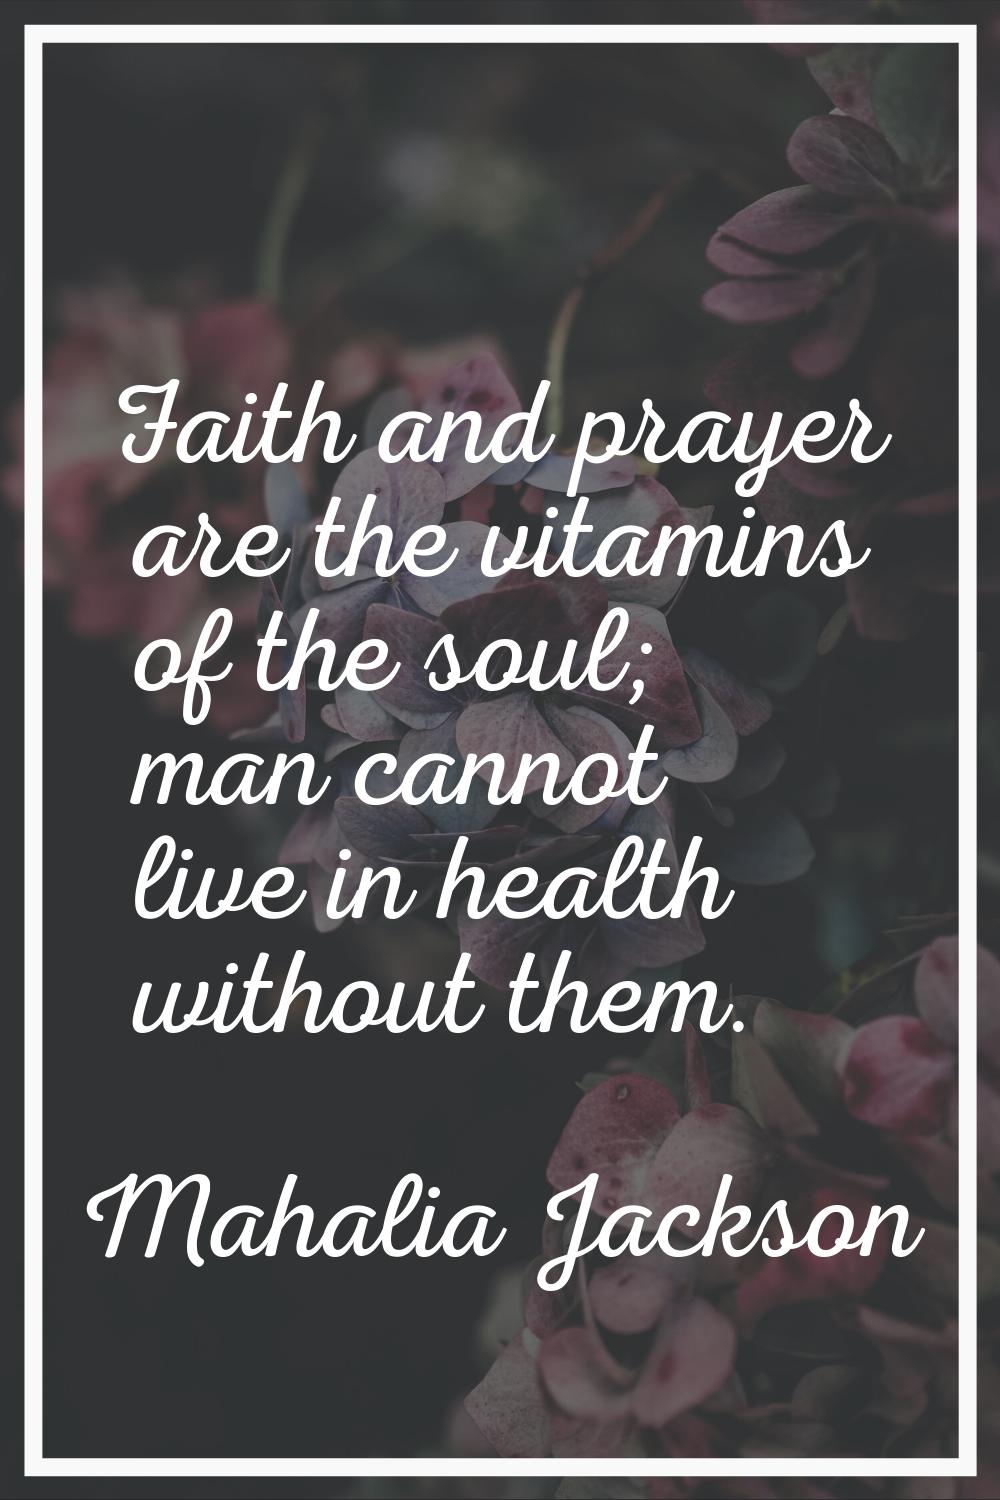 Faith and prayer are the vitamins of the soul; man cannot live in health without them.